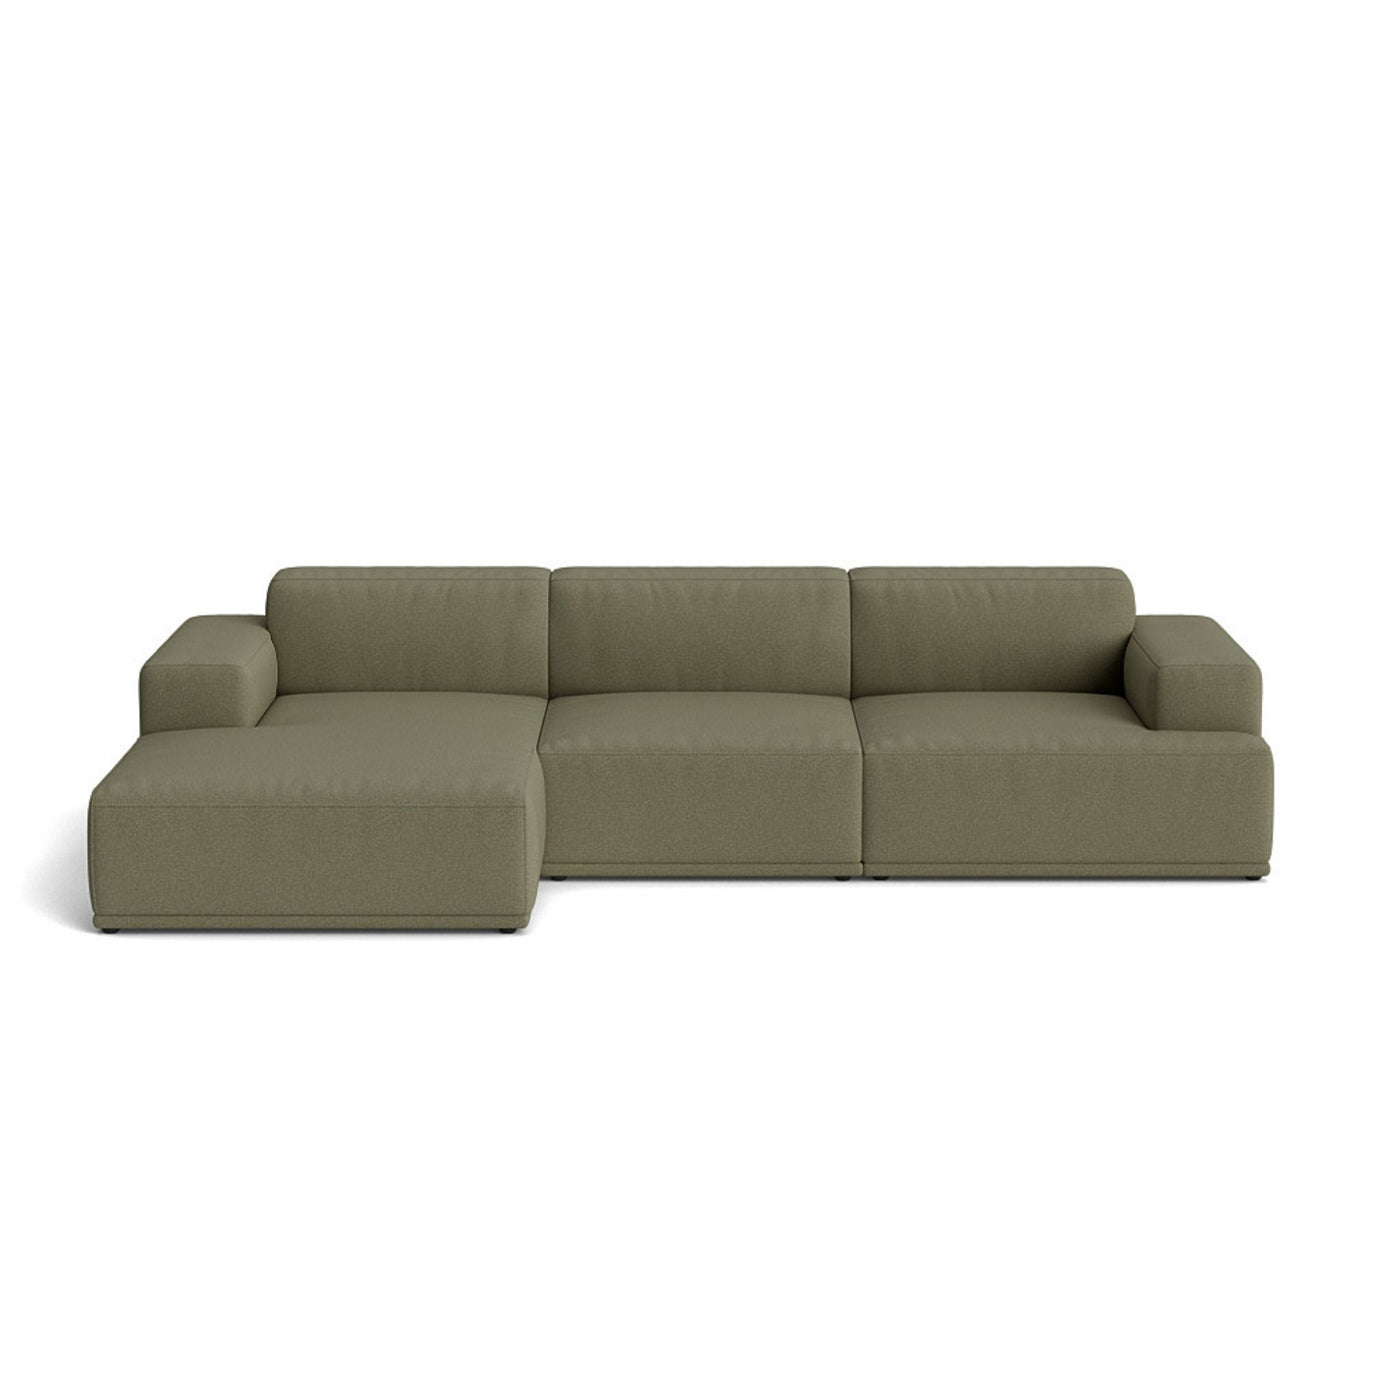 Muuto Connect Soft Modular 3 Seater Sofa, configuration 2. Made-to-order from someday designs. #colour_clay-17